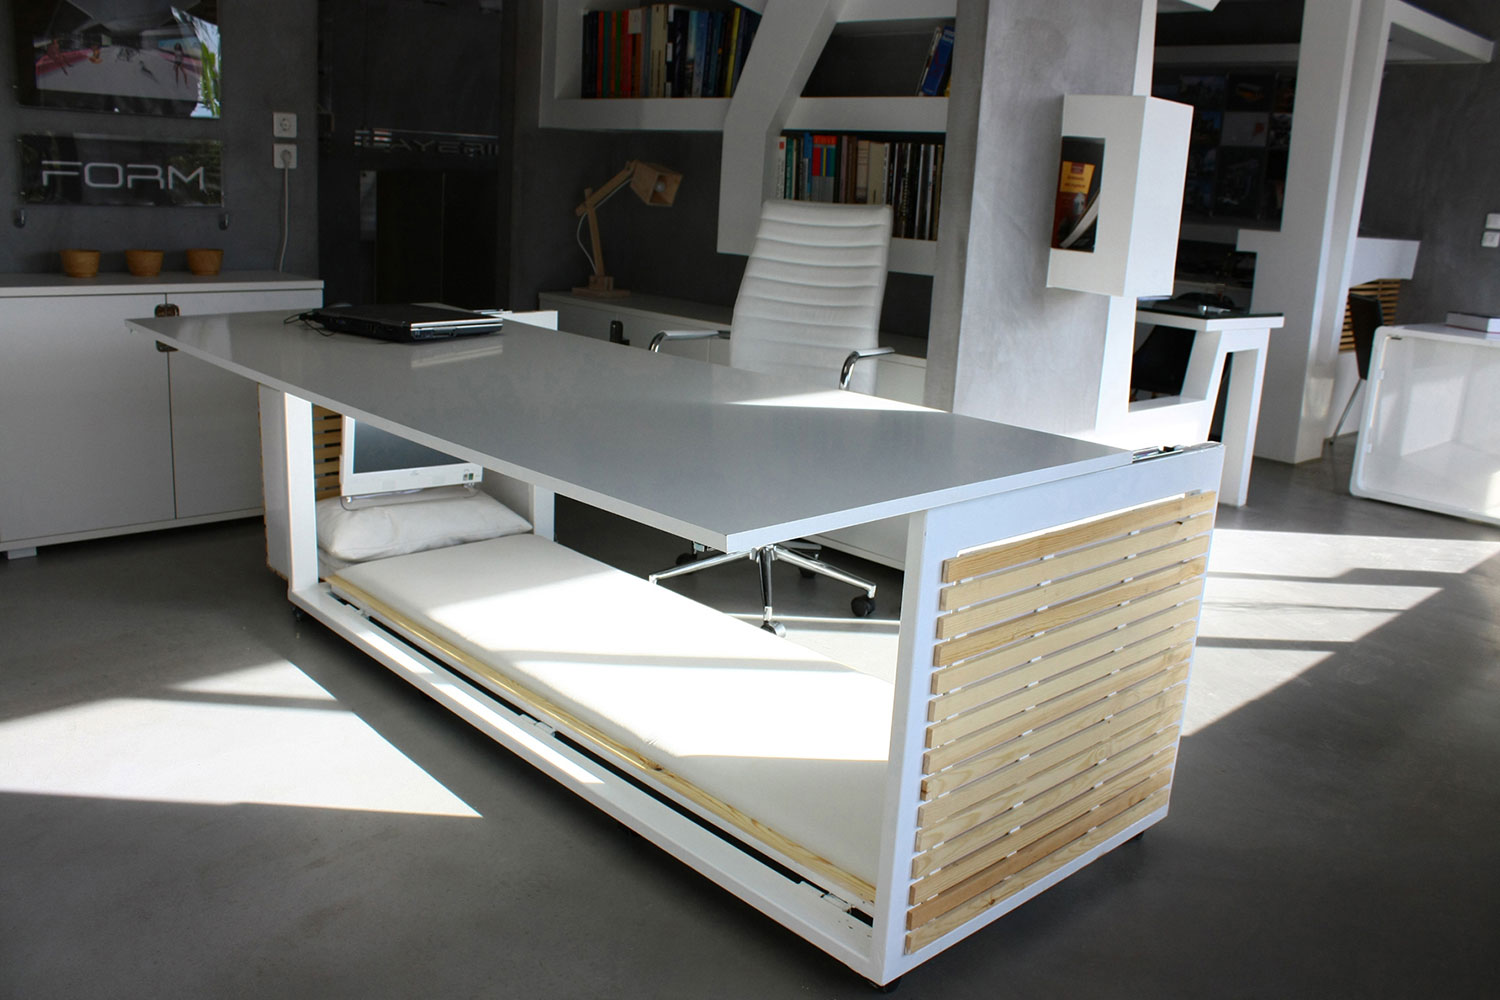 this bed desk would make it easy to nap at work 1  6 s m of life 001